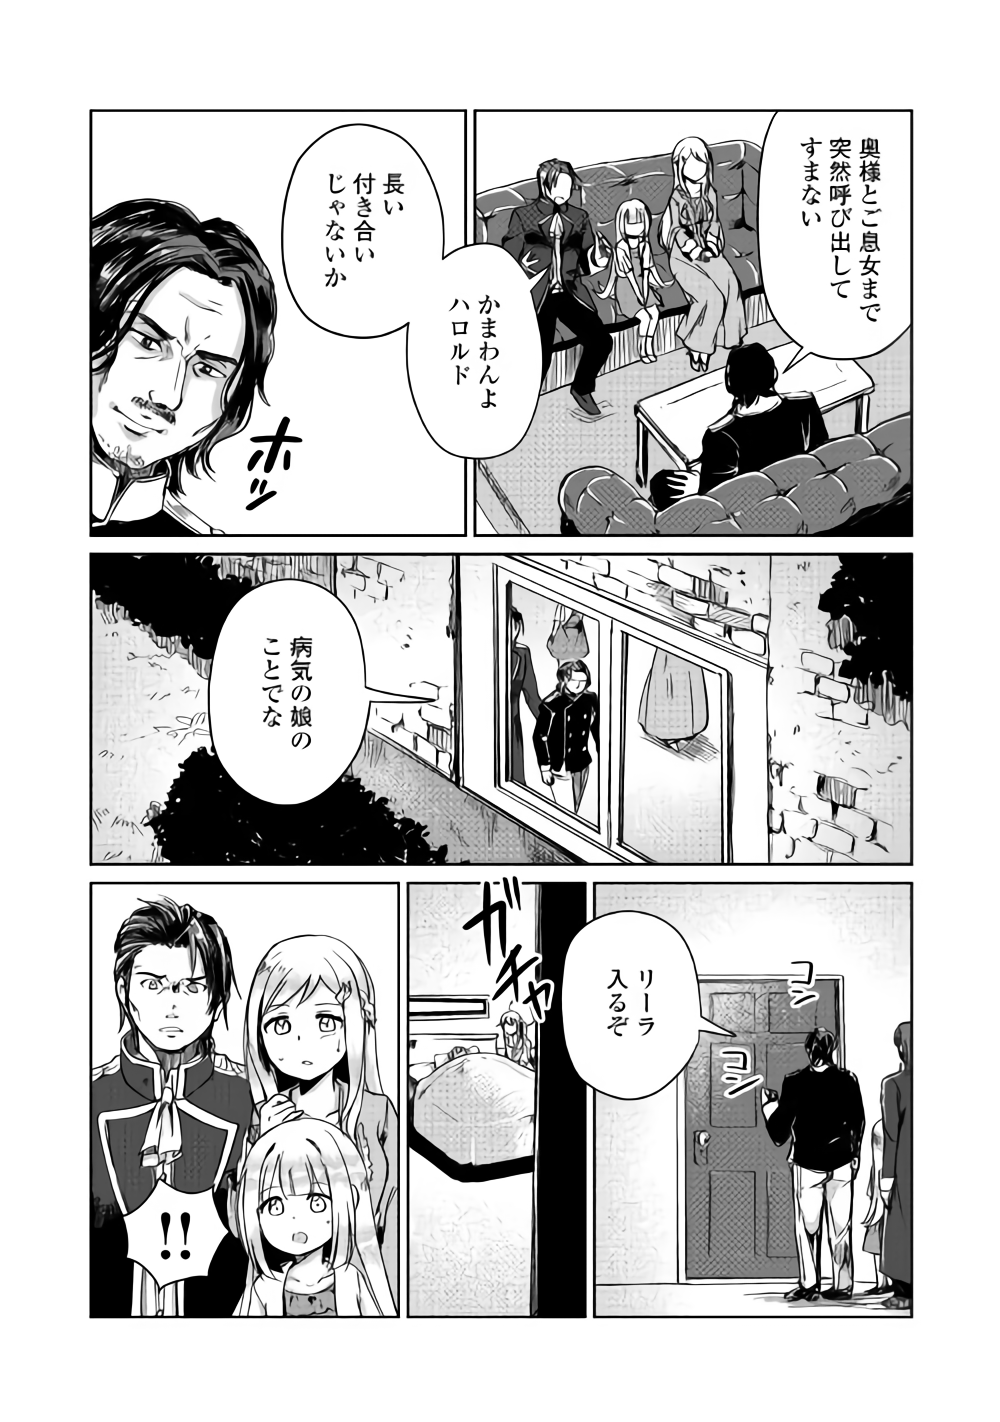 The Former Structural Researcher’s Story of Otherworldly Adventure 第4話 - Page 14